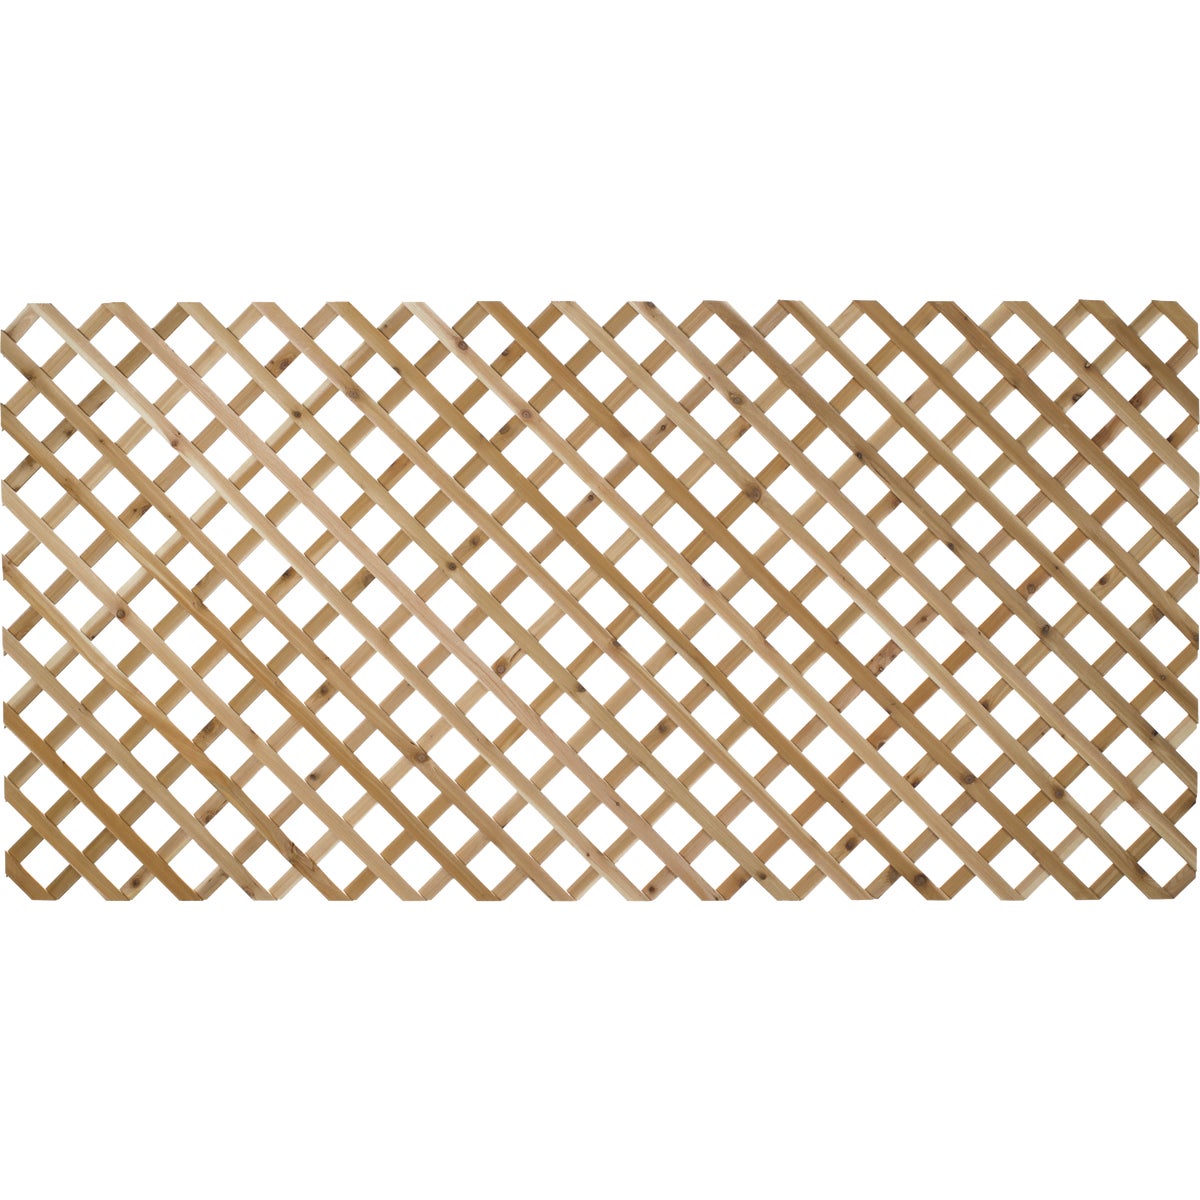 Real Wood Products 4 Ft. W. x 8 Ft. L. x 1/2 In. Thick Natural Cedar Lattice Panel